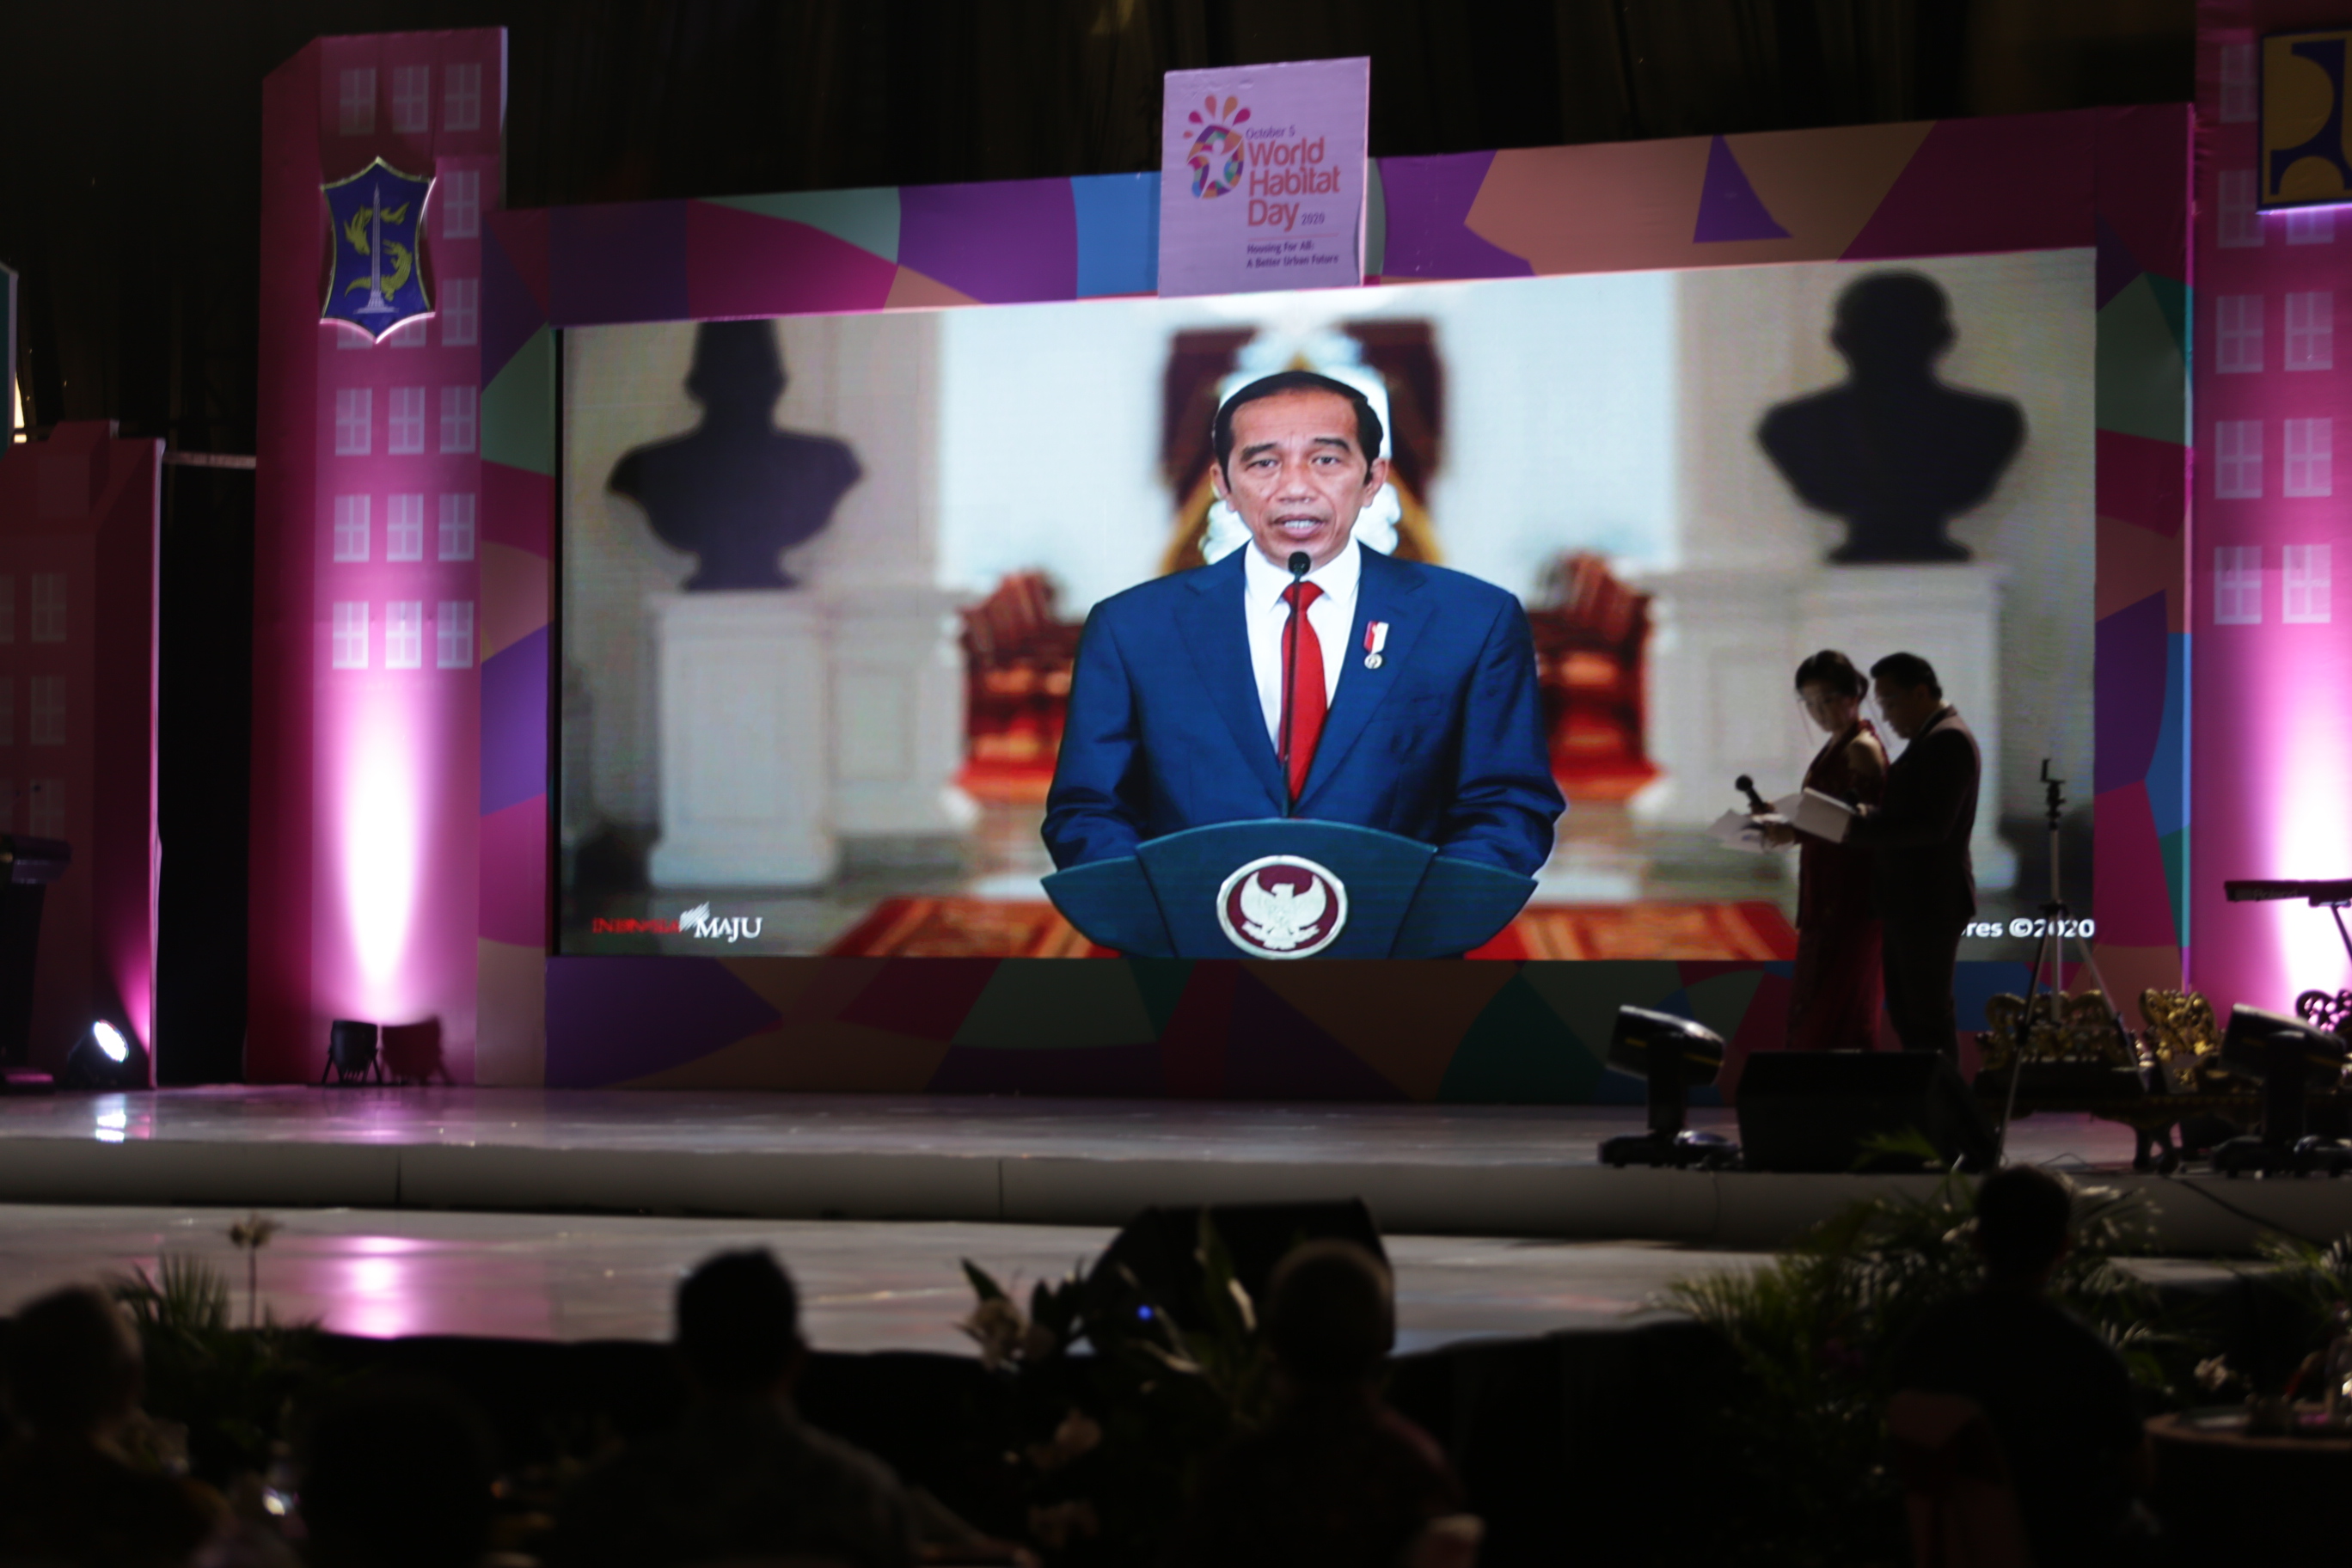 President of Indonesia giving a speech through a video message on World Habitat Day.